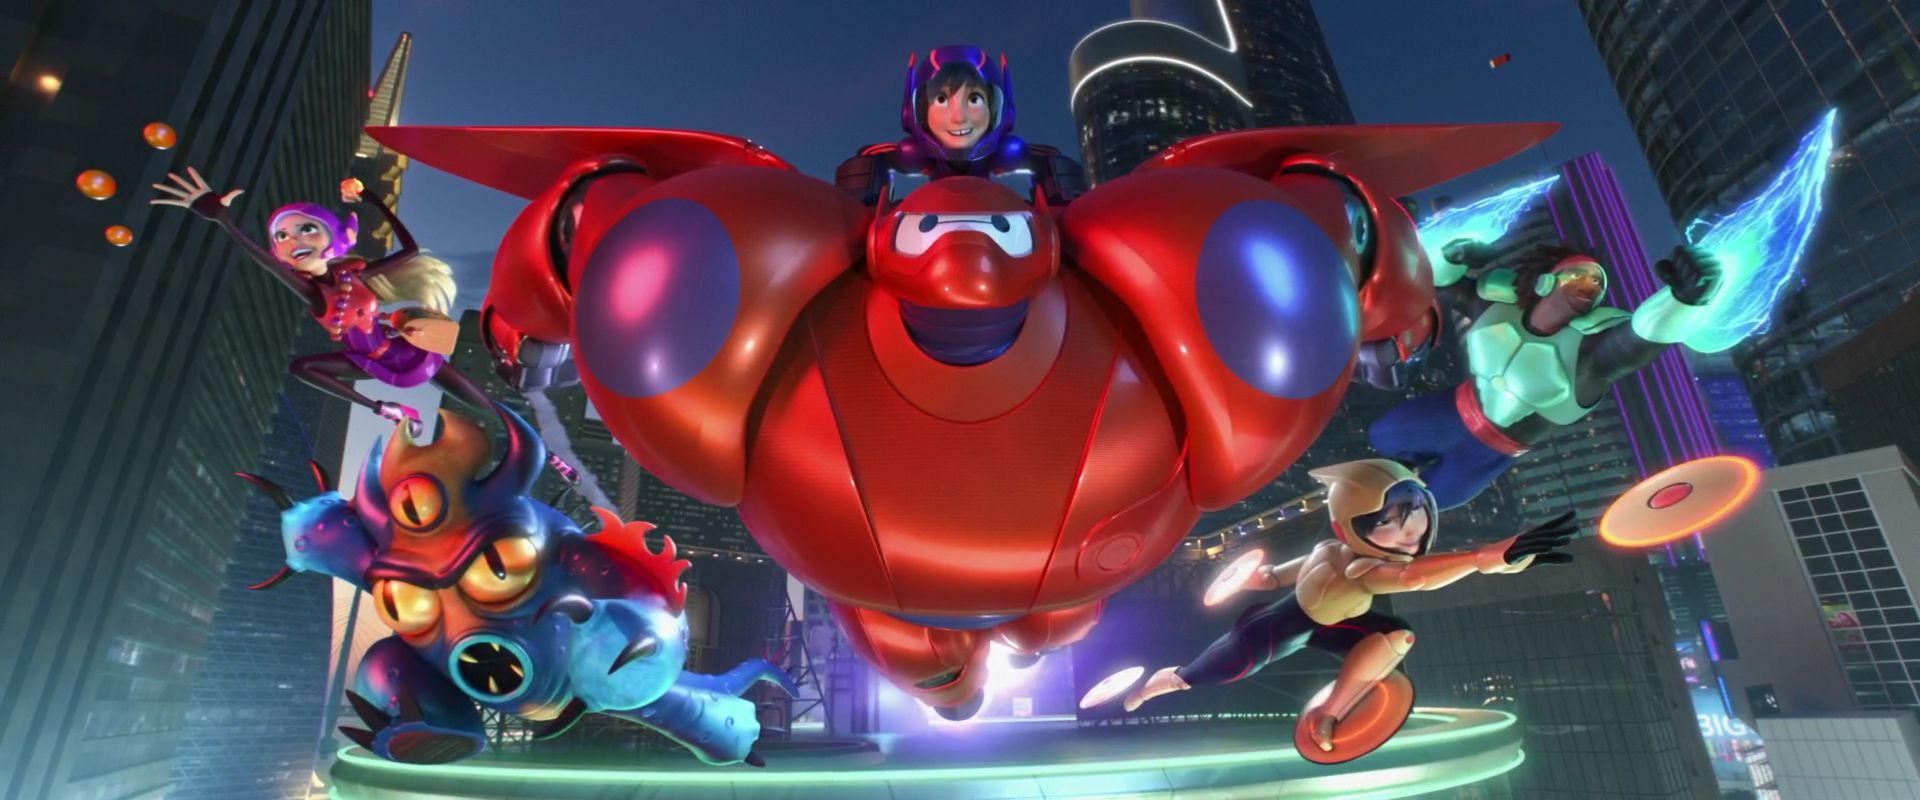 ‘Big Hero 6 The Series’ Given A Second Season Before Premiere